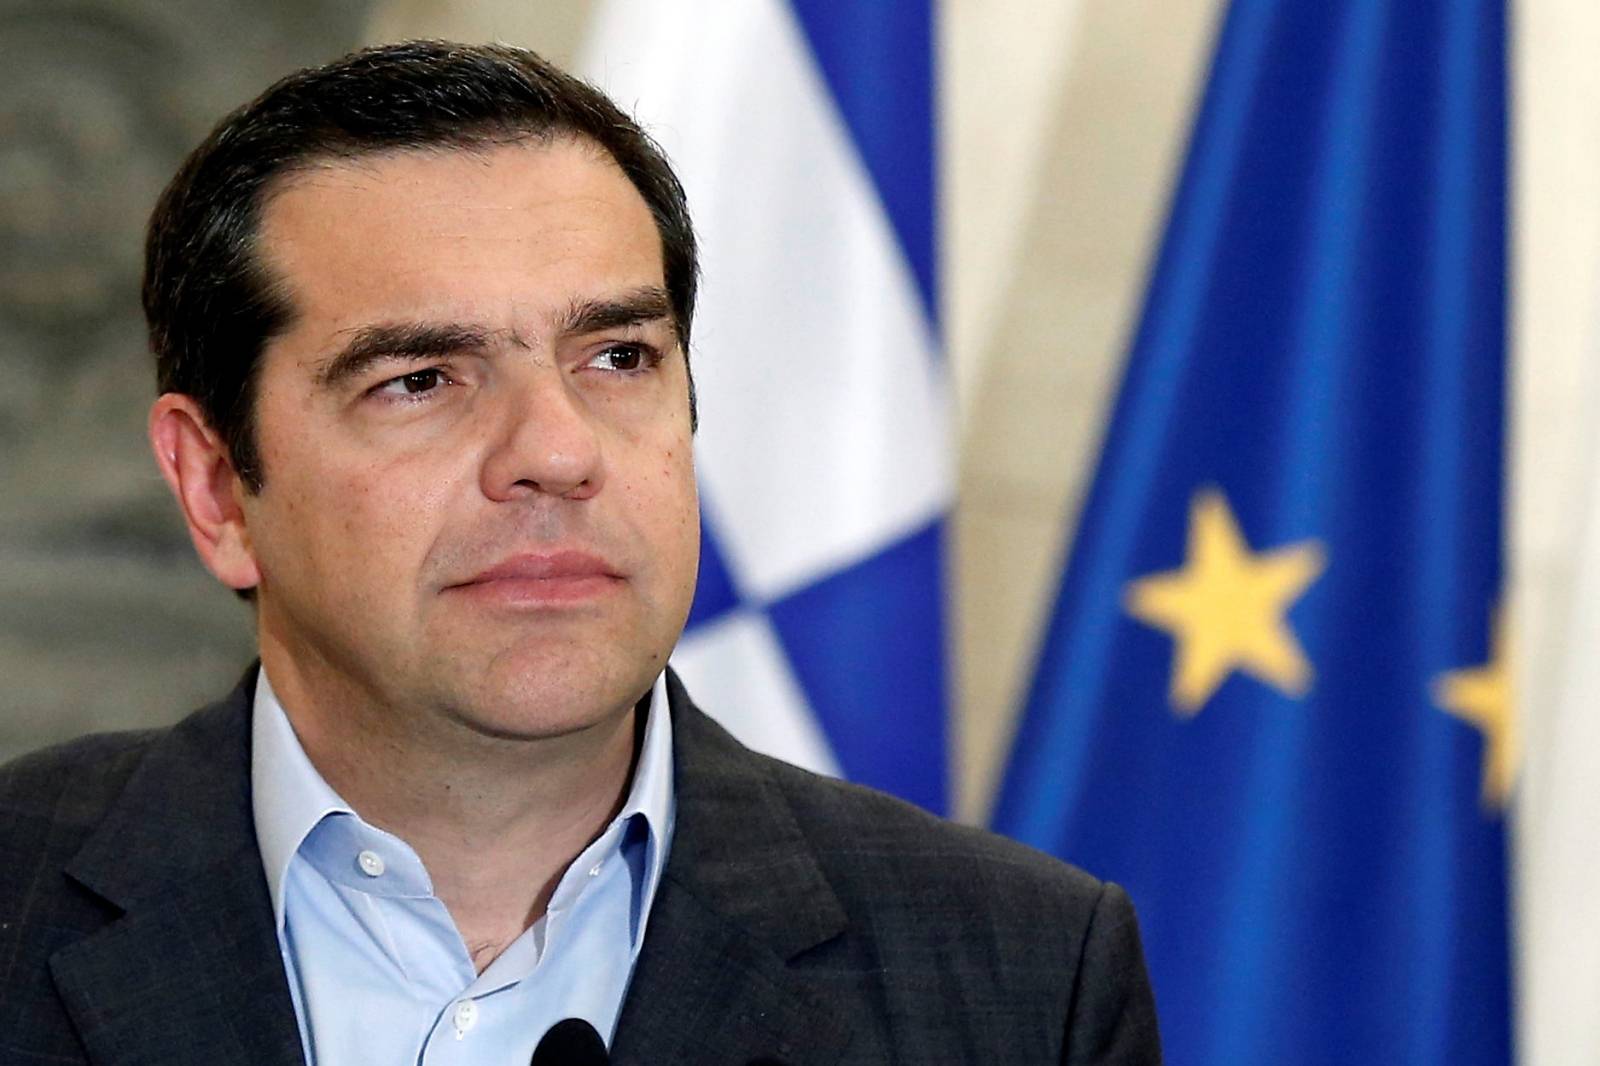 Greek Prime Minister Alexis Tsipras attends joint statements with his Danish counterpart Lars Loekke Rasmussen after their meeting at the Maximos Mansion in Athens